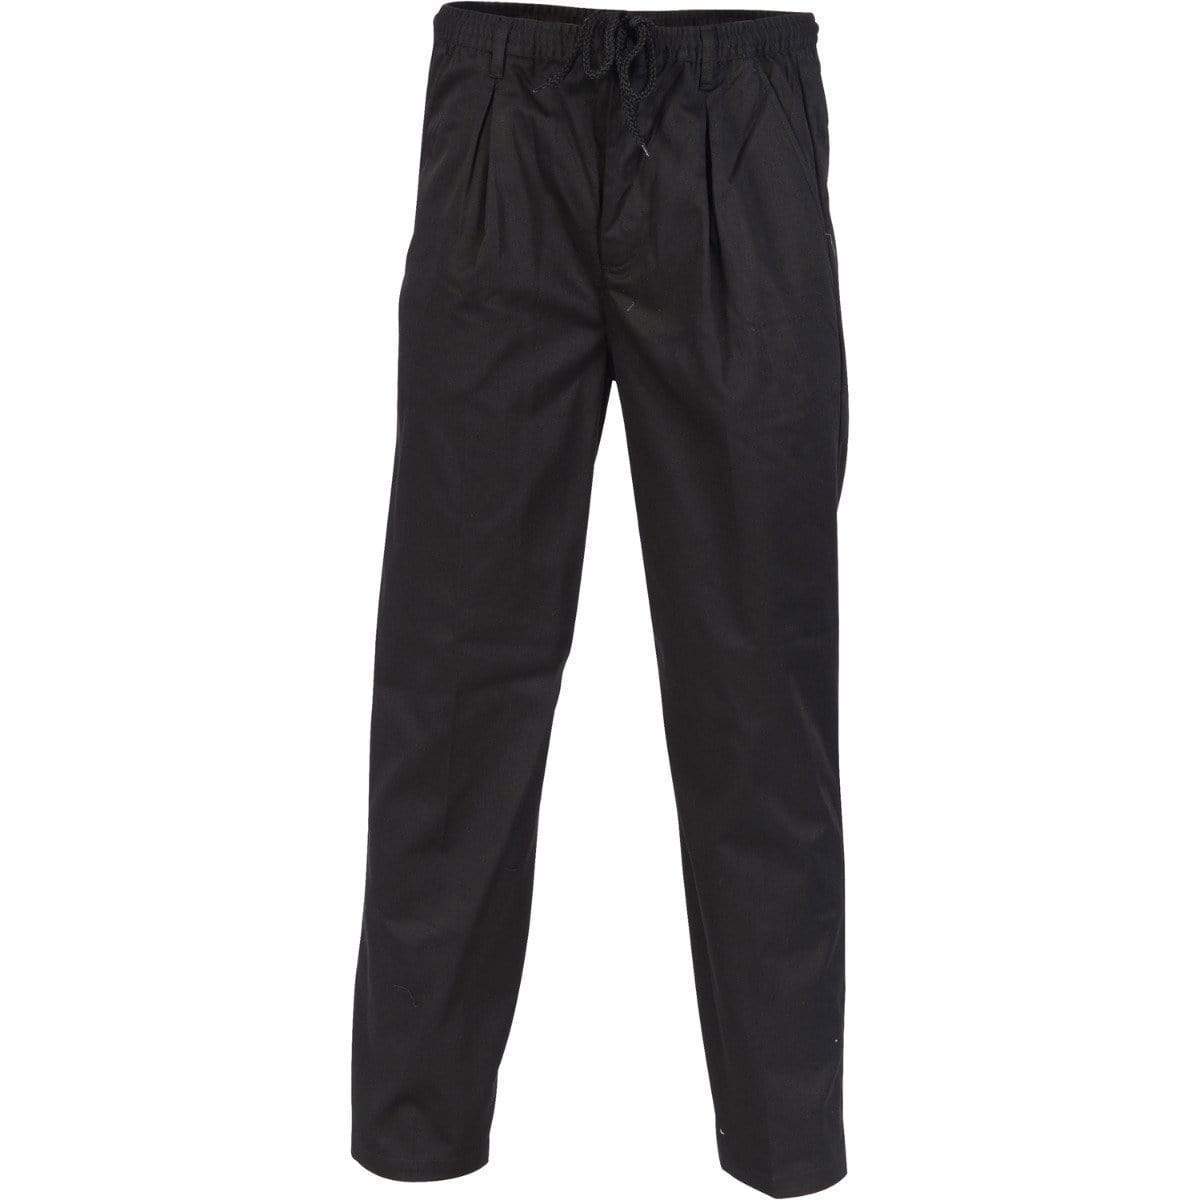 Dnc Workwear Polyester Cotton 3-in-1 Pants - 1503 Hospitality & Chefwear DNC Workwear Black XS 